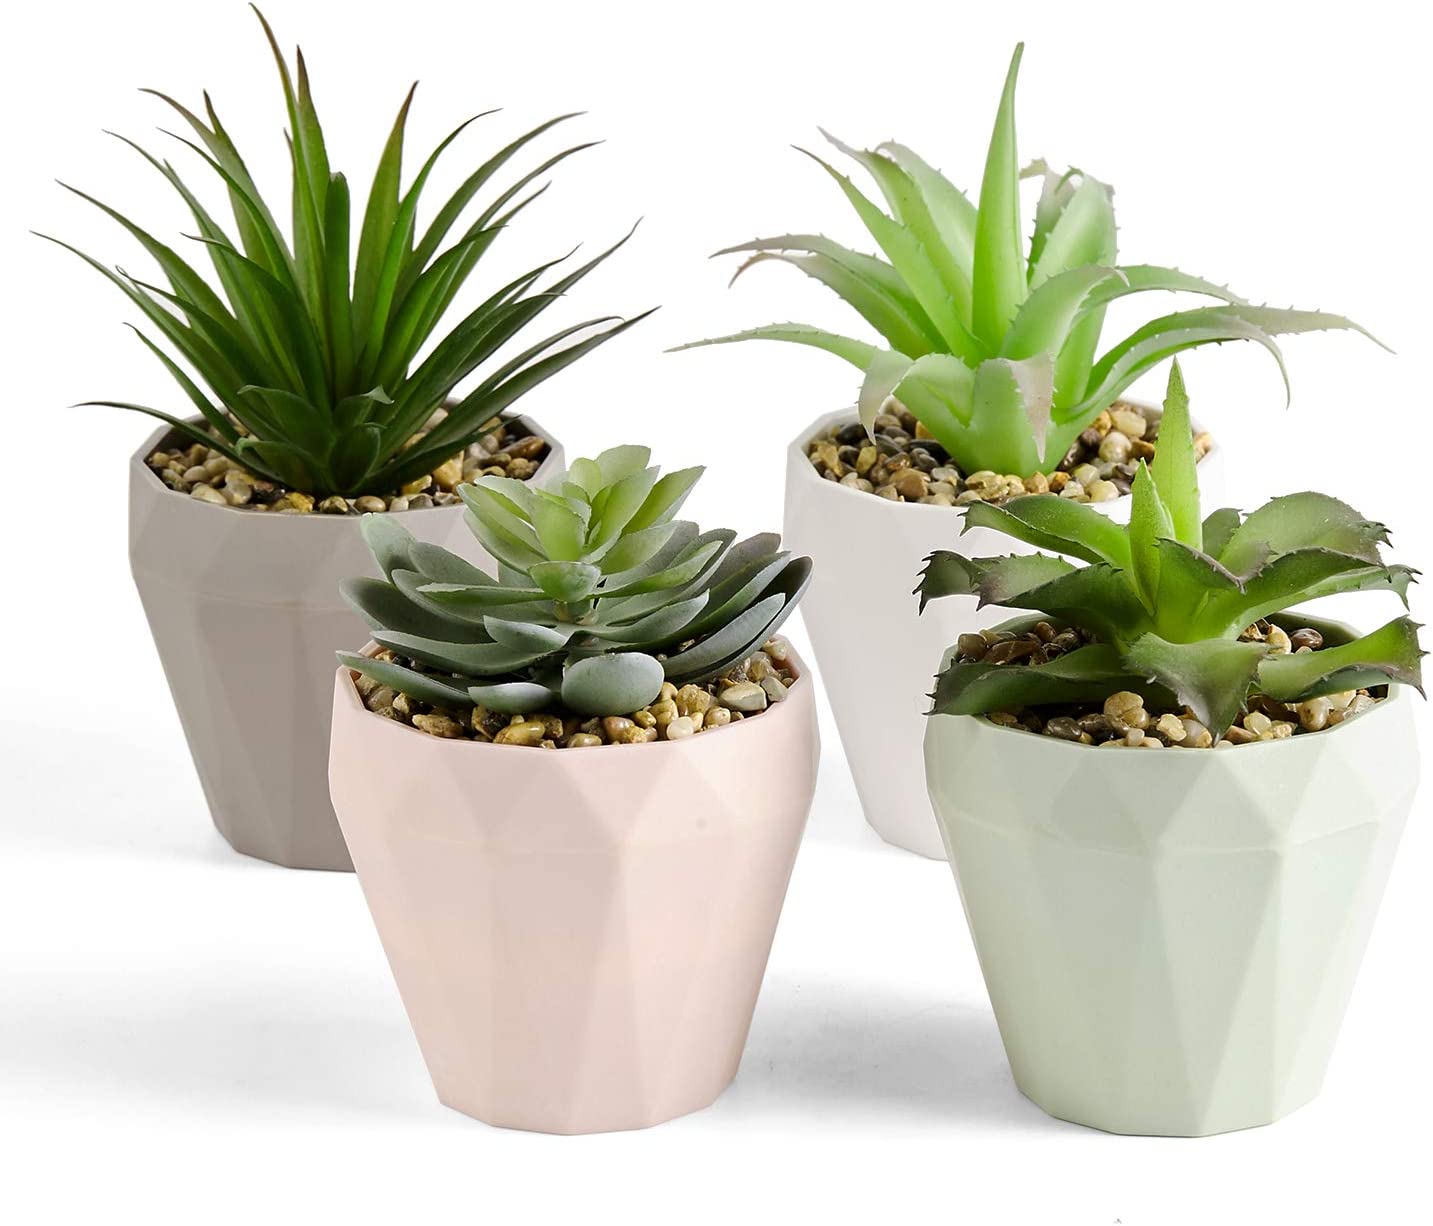 Primaison Green Artificial Plants DIY Decor Gift Set of 4 RRP £19.89 CLEARANCE XL £14.99